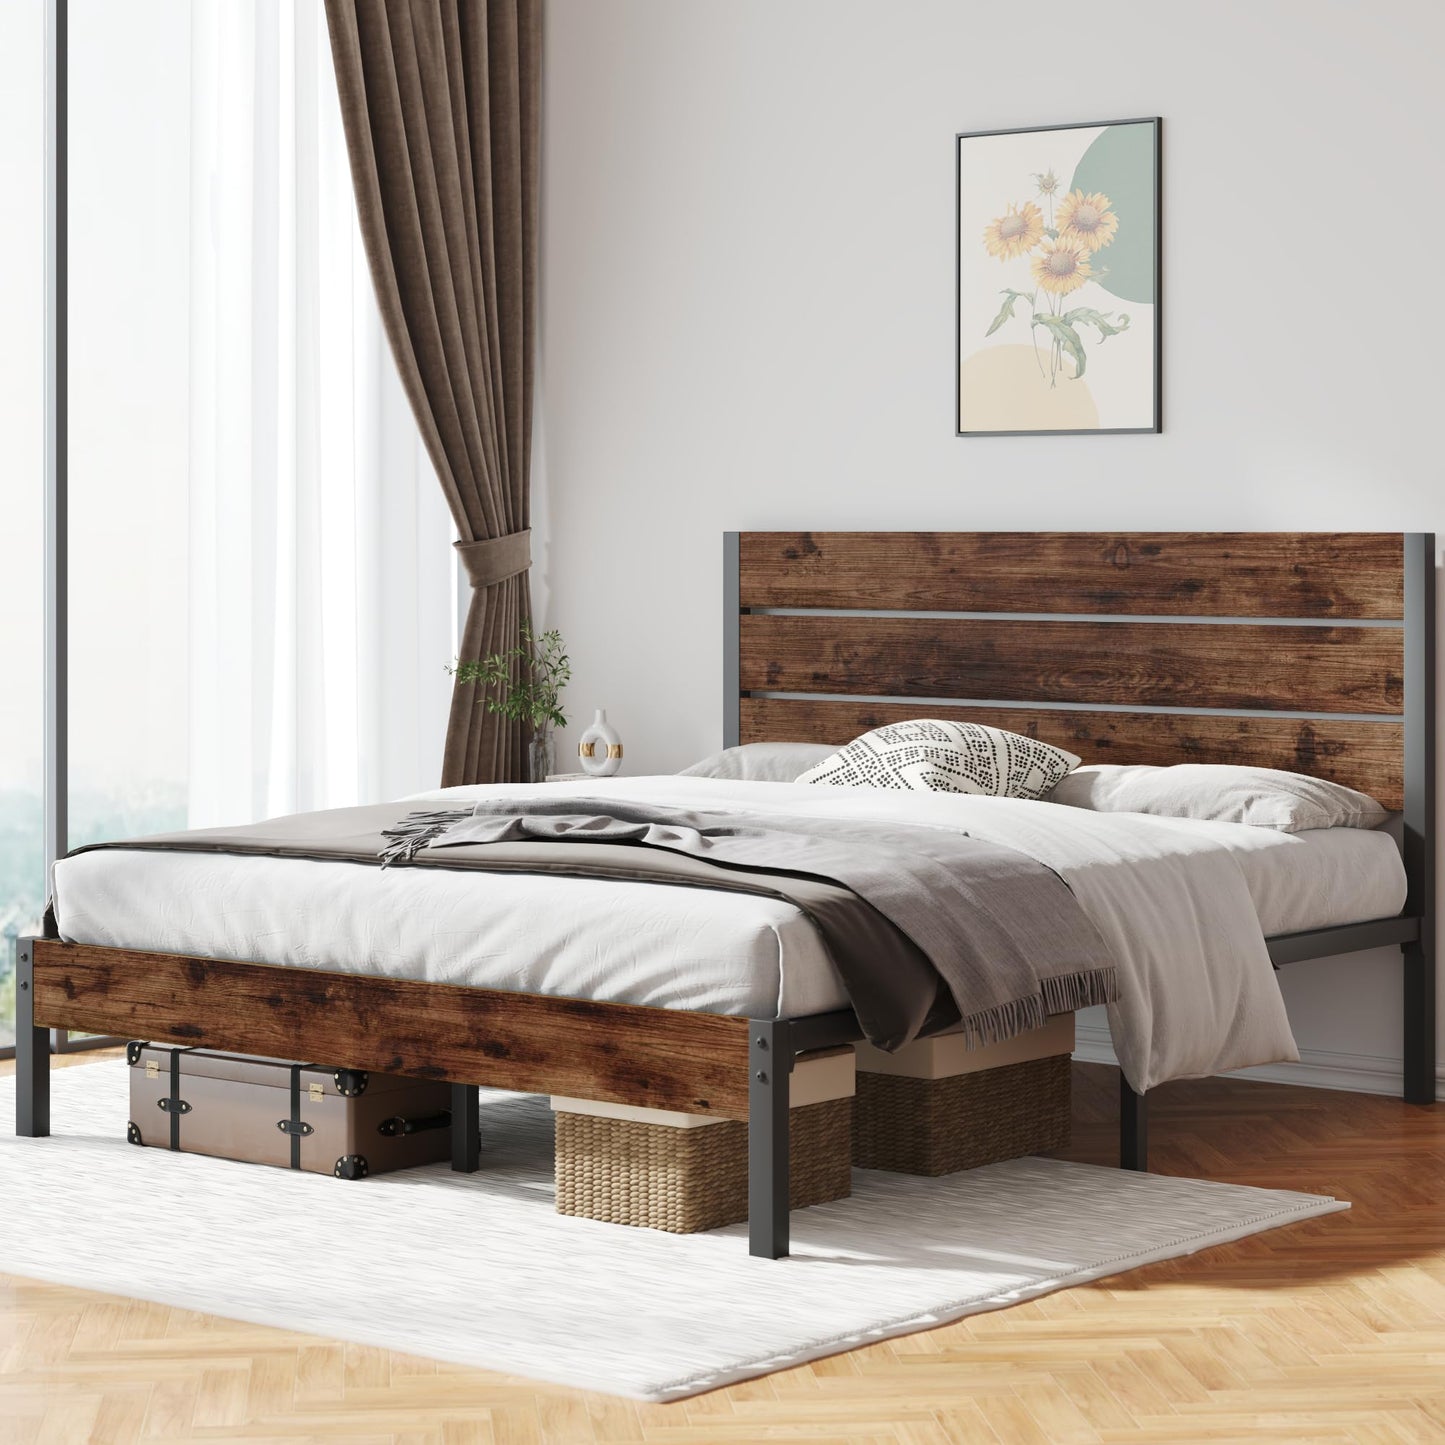 Fluest Queen Bed Frame with Headboard and Footboard, with Under Bed Storage, All-Metal Support System, No Box Spring Needed, Easy Assembly,Rustic